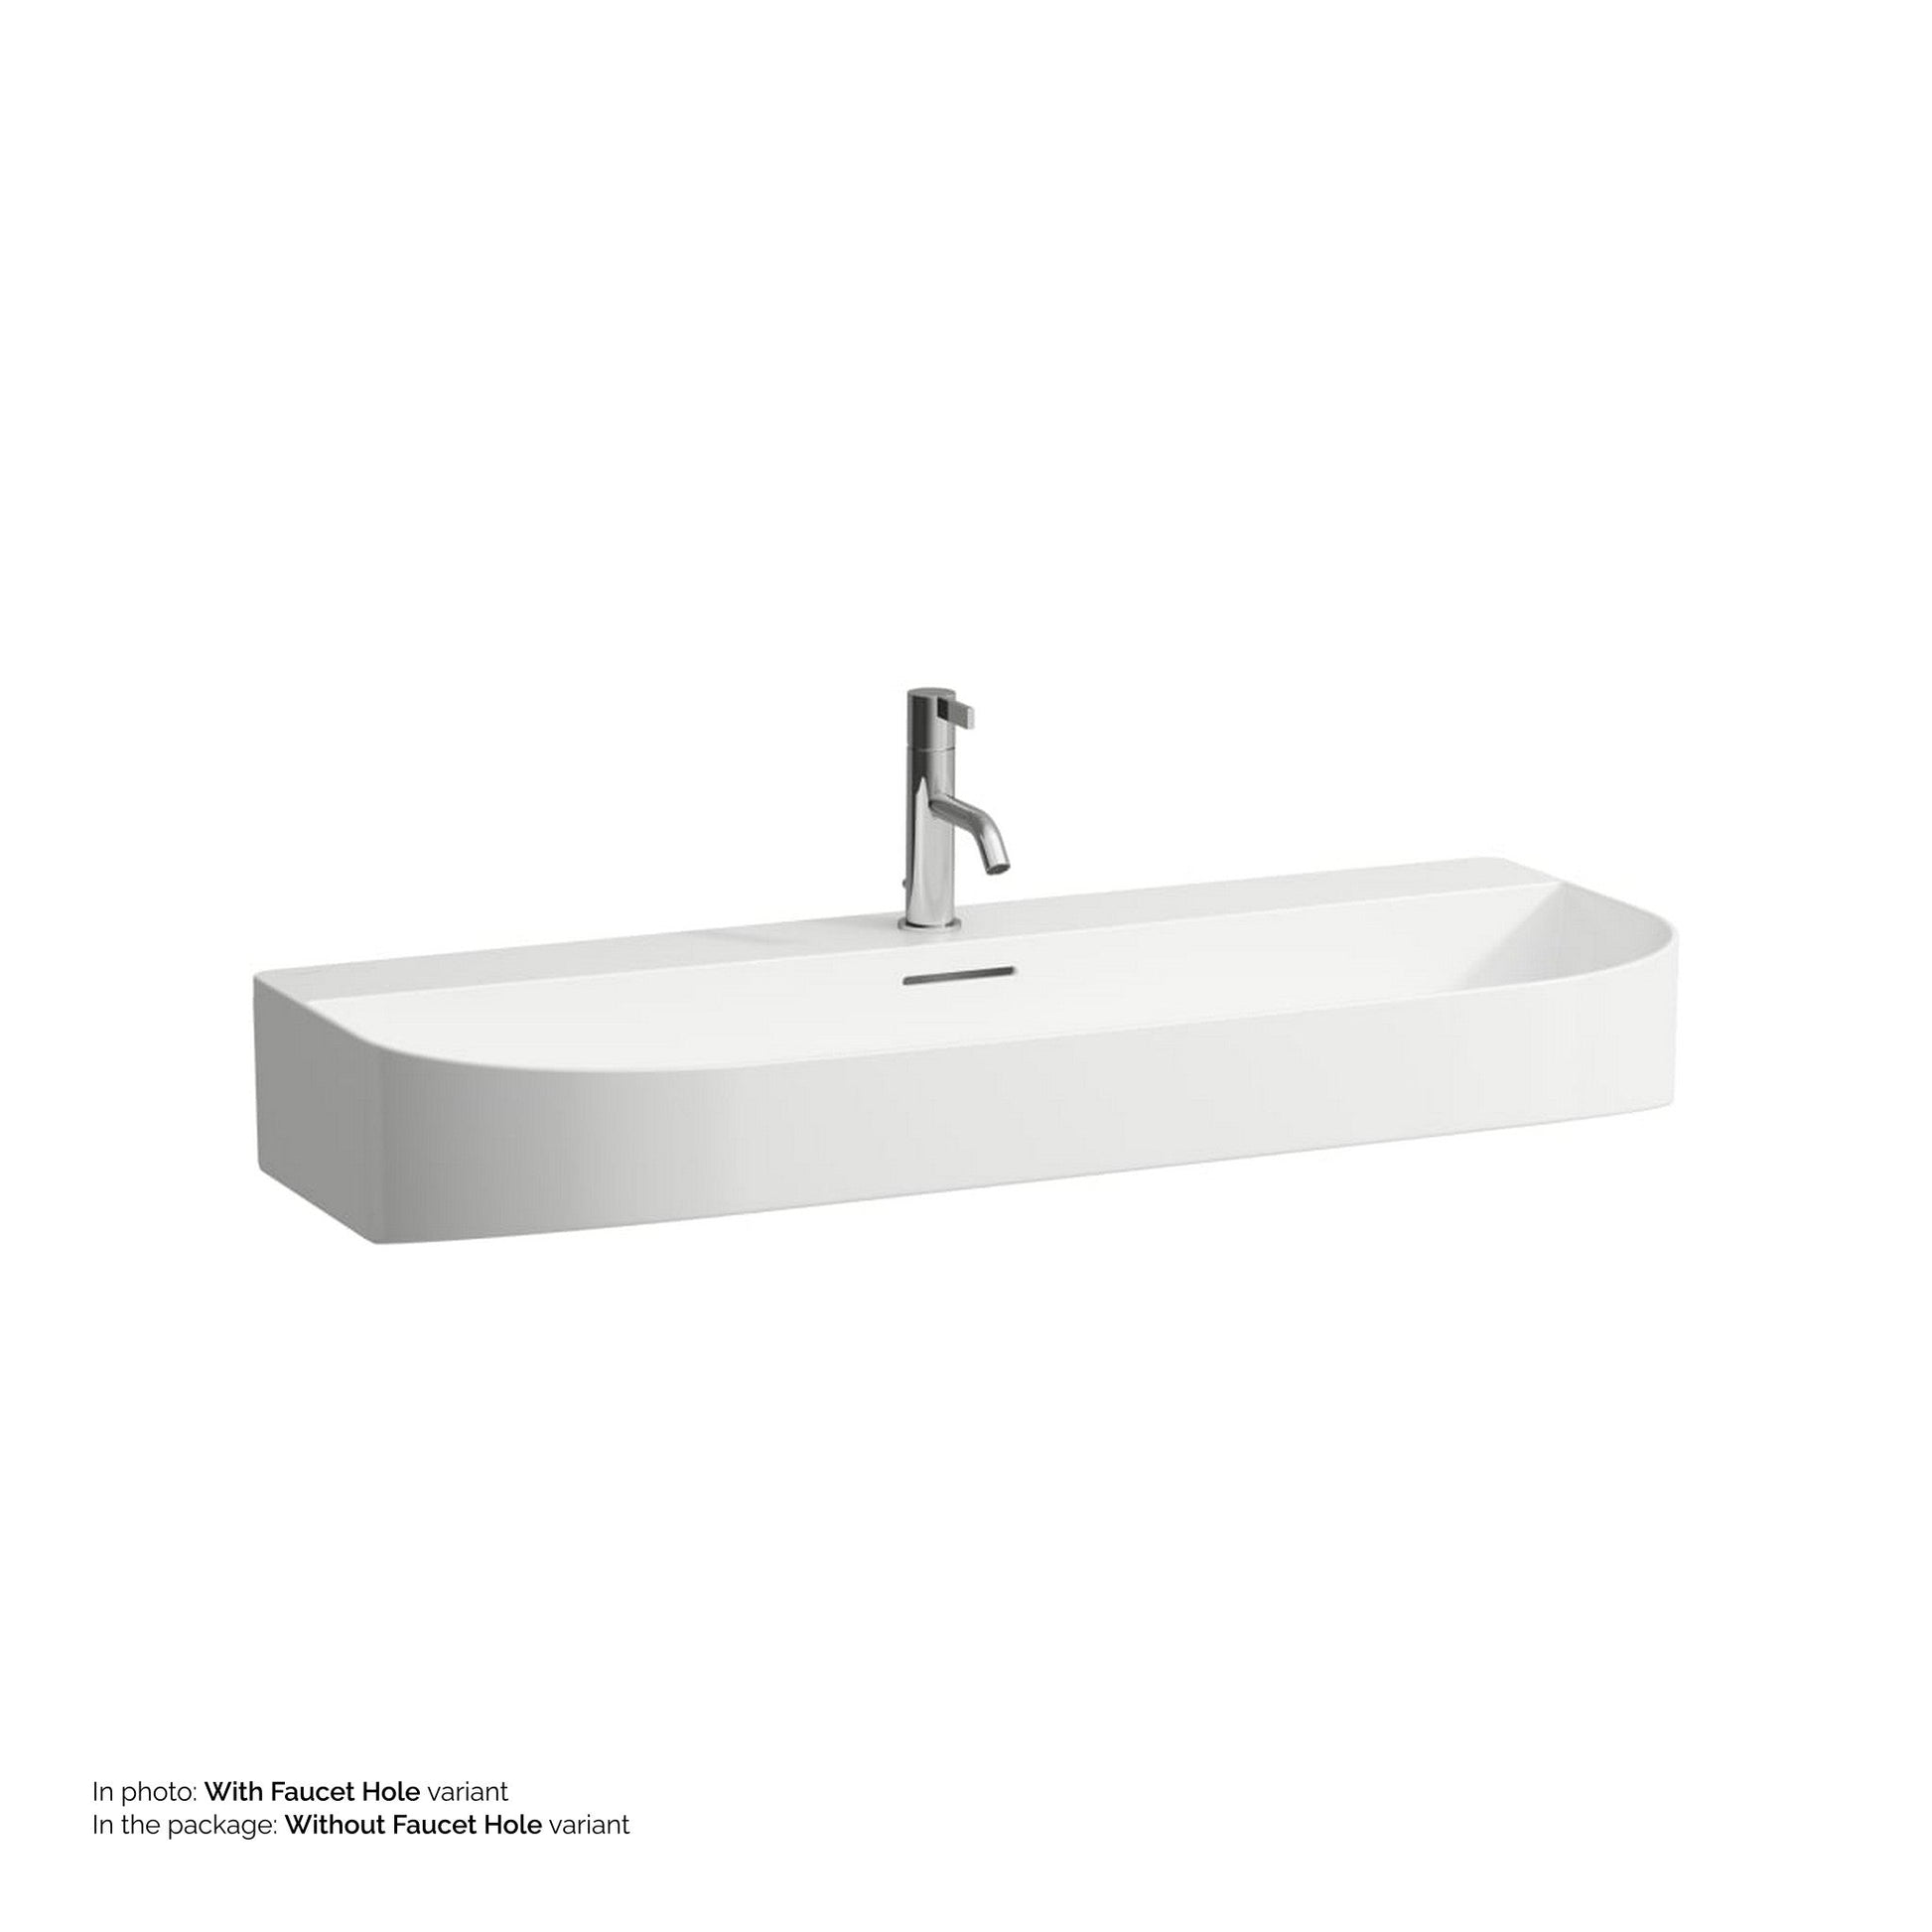 Laufen Sonar 39" Matte White Ceramic Wall-Mounted Bathroom Sink Without Faucet Hole